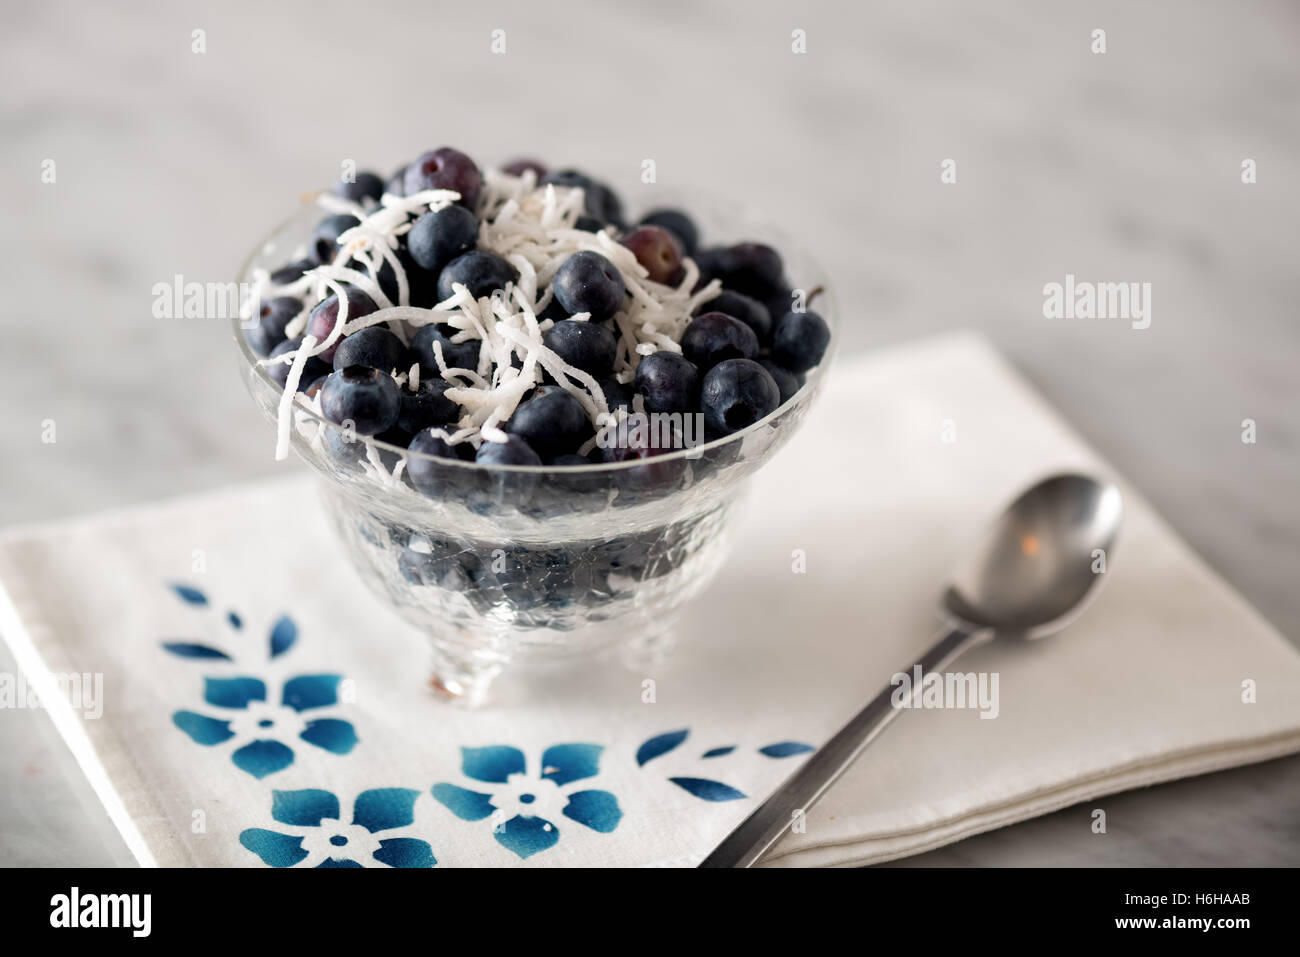 Blueberries with shredded coconut on white marble Stock Photo